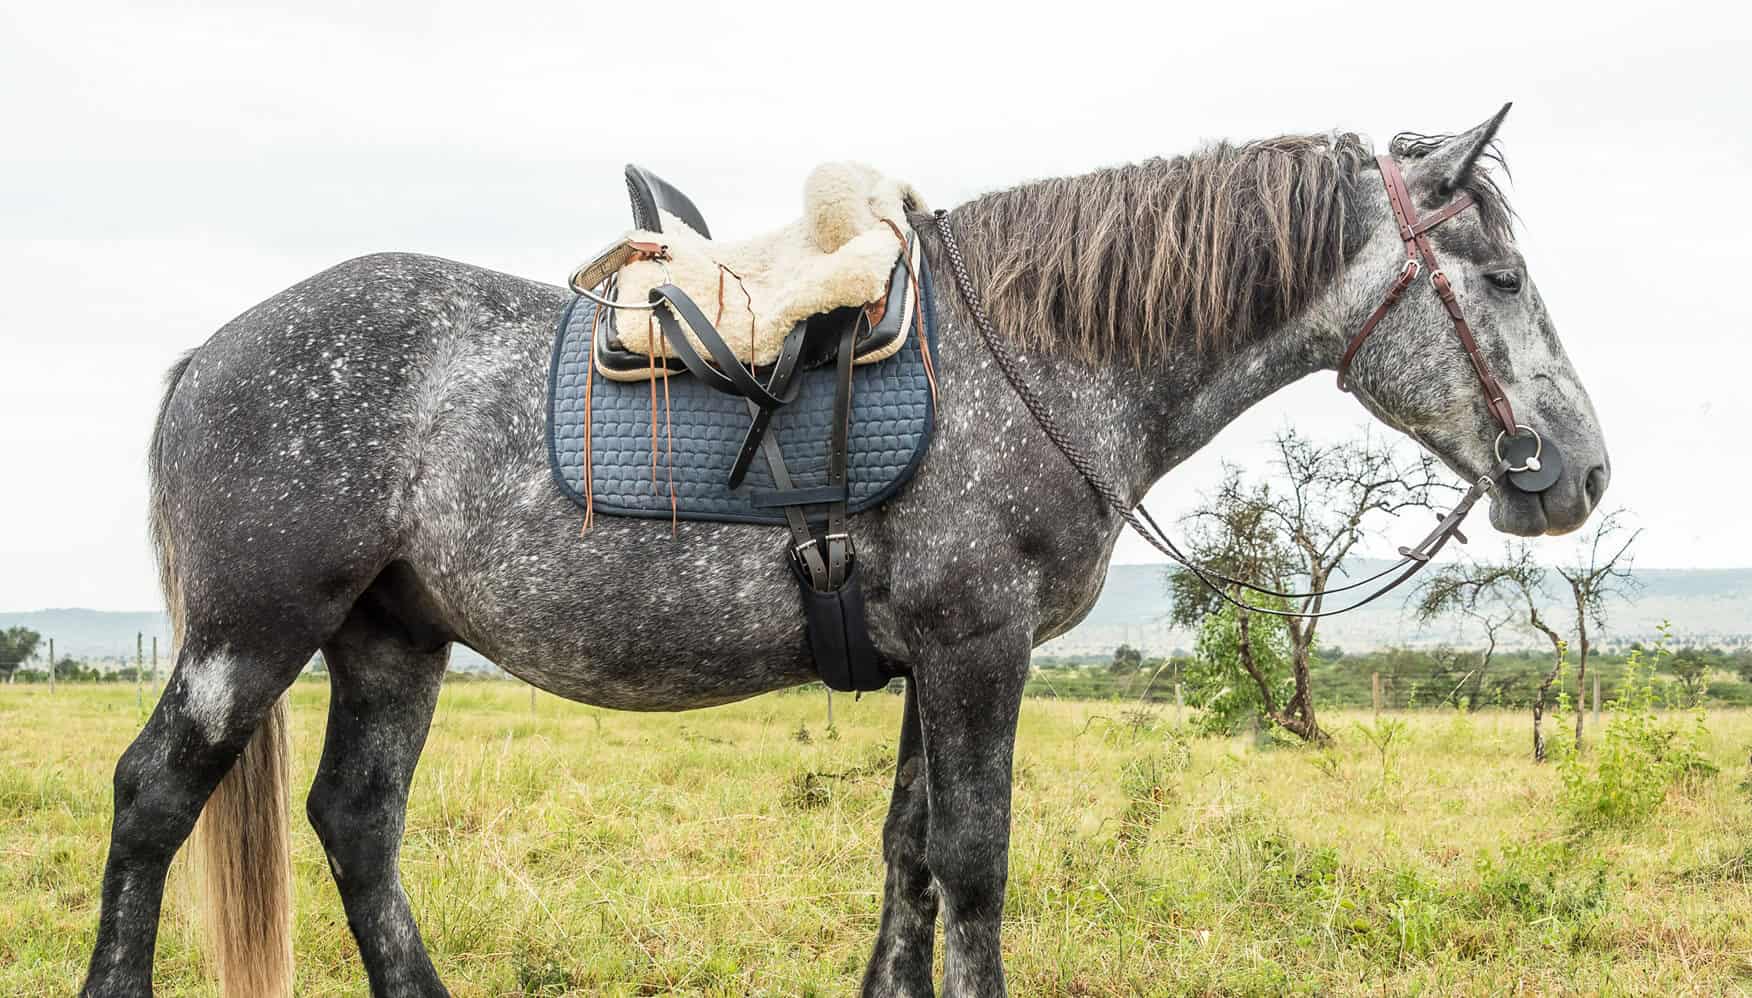 Meaning Splendour or Glory, Baha is a purebred Percheron Sports horse. Born and raised in South Africa’s Eastern Cape, he’s our thunder machine.